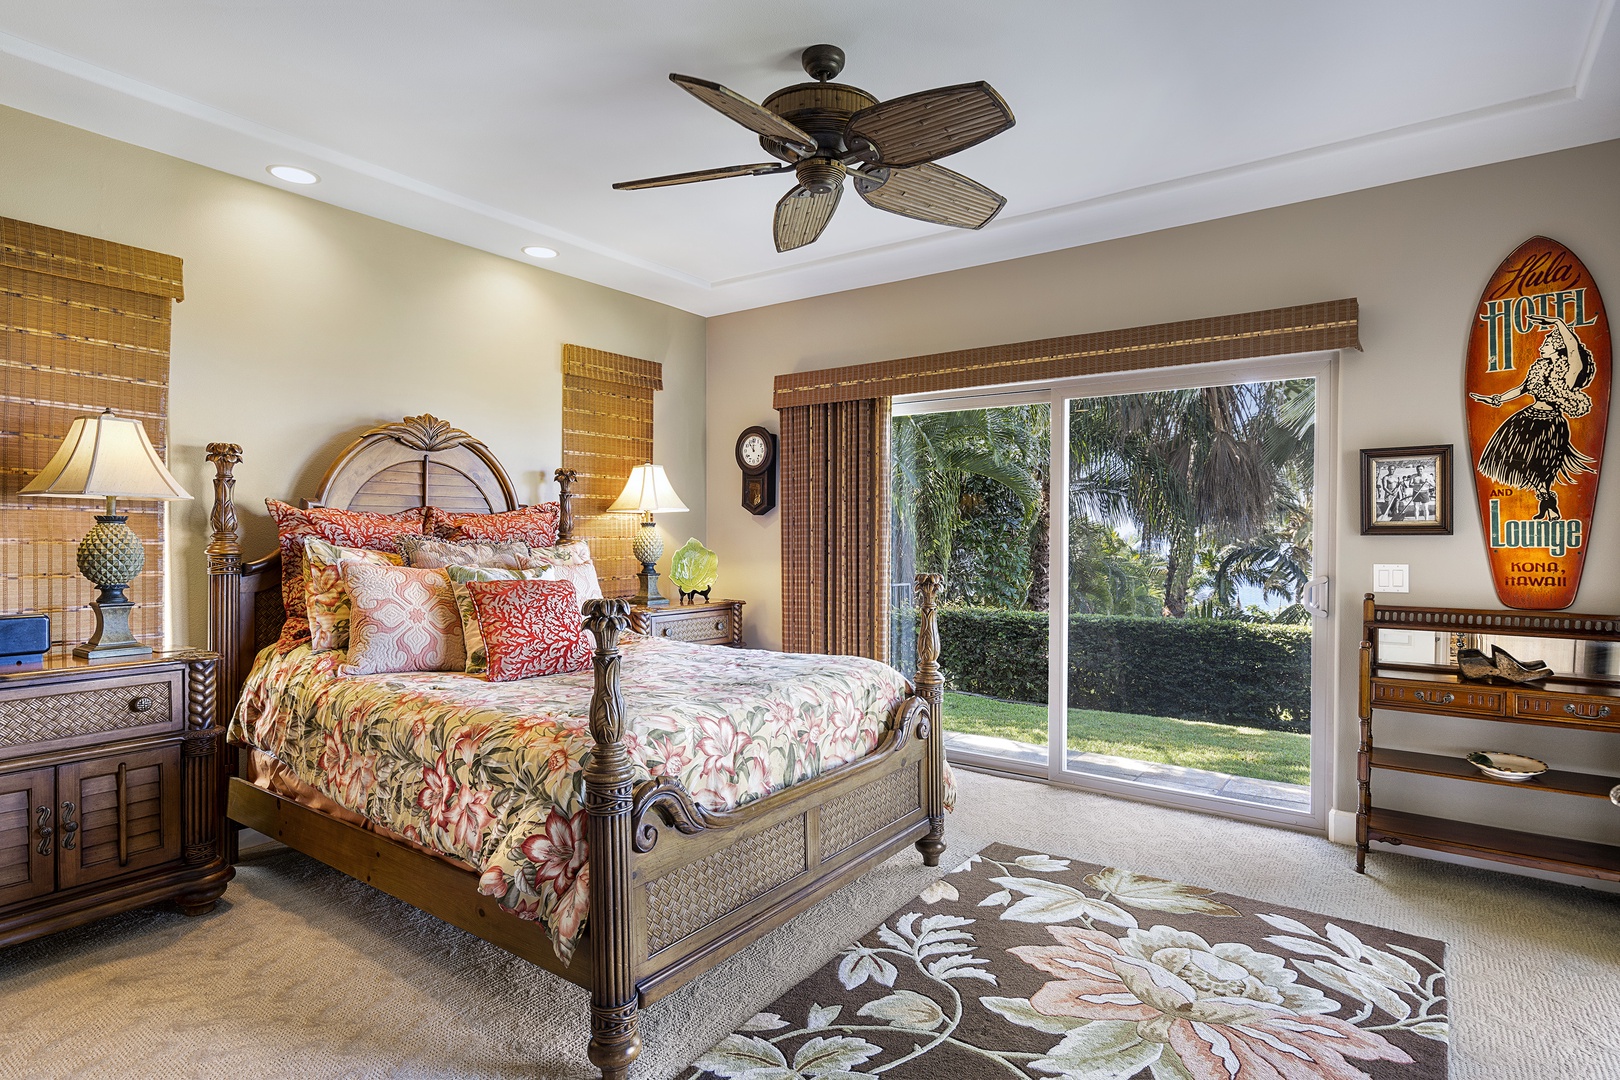 Kailua Kona Vacation Rentals, Hale Aikane - Guest bedroom with Queen bed and Lanai access!